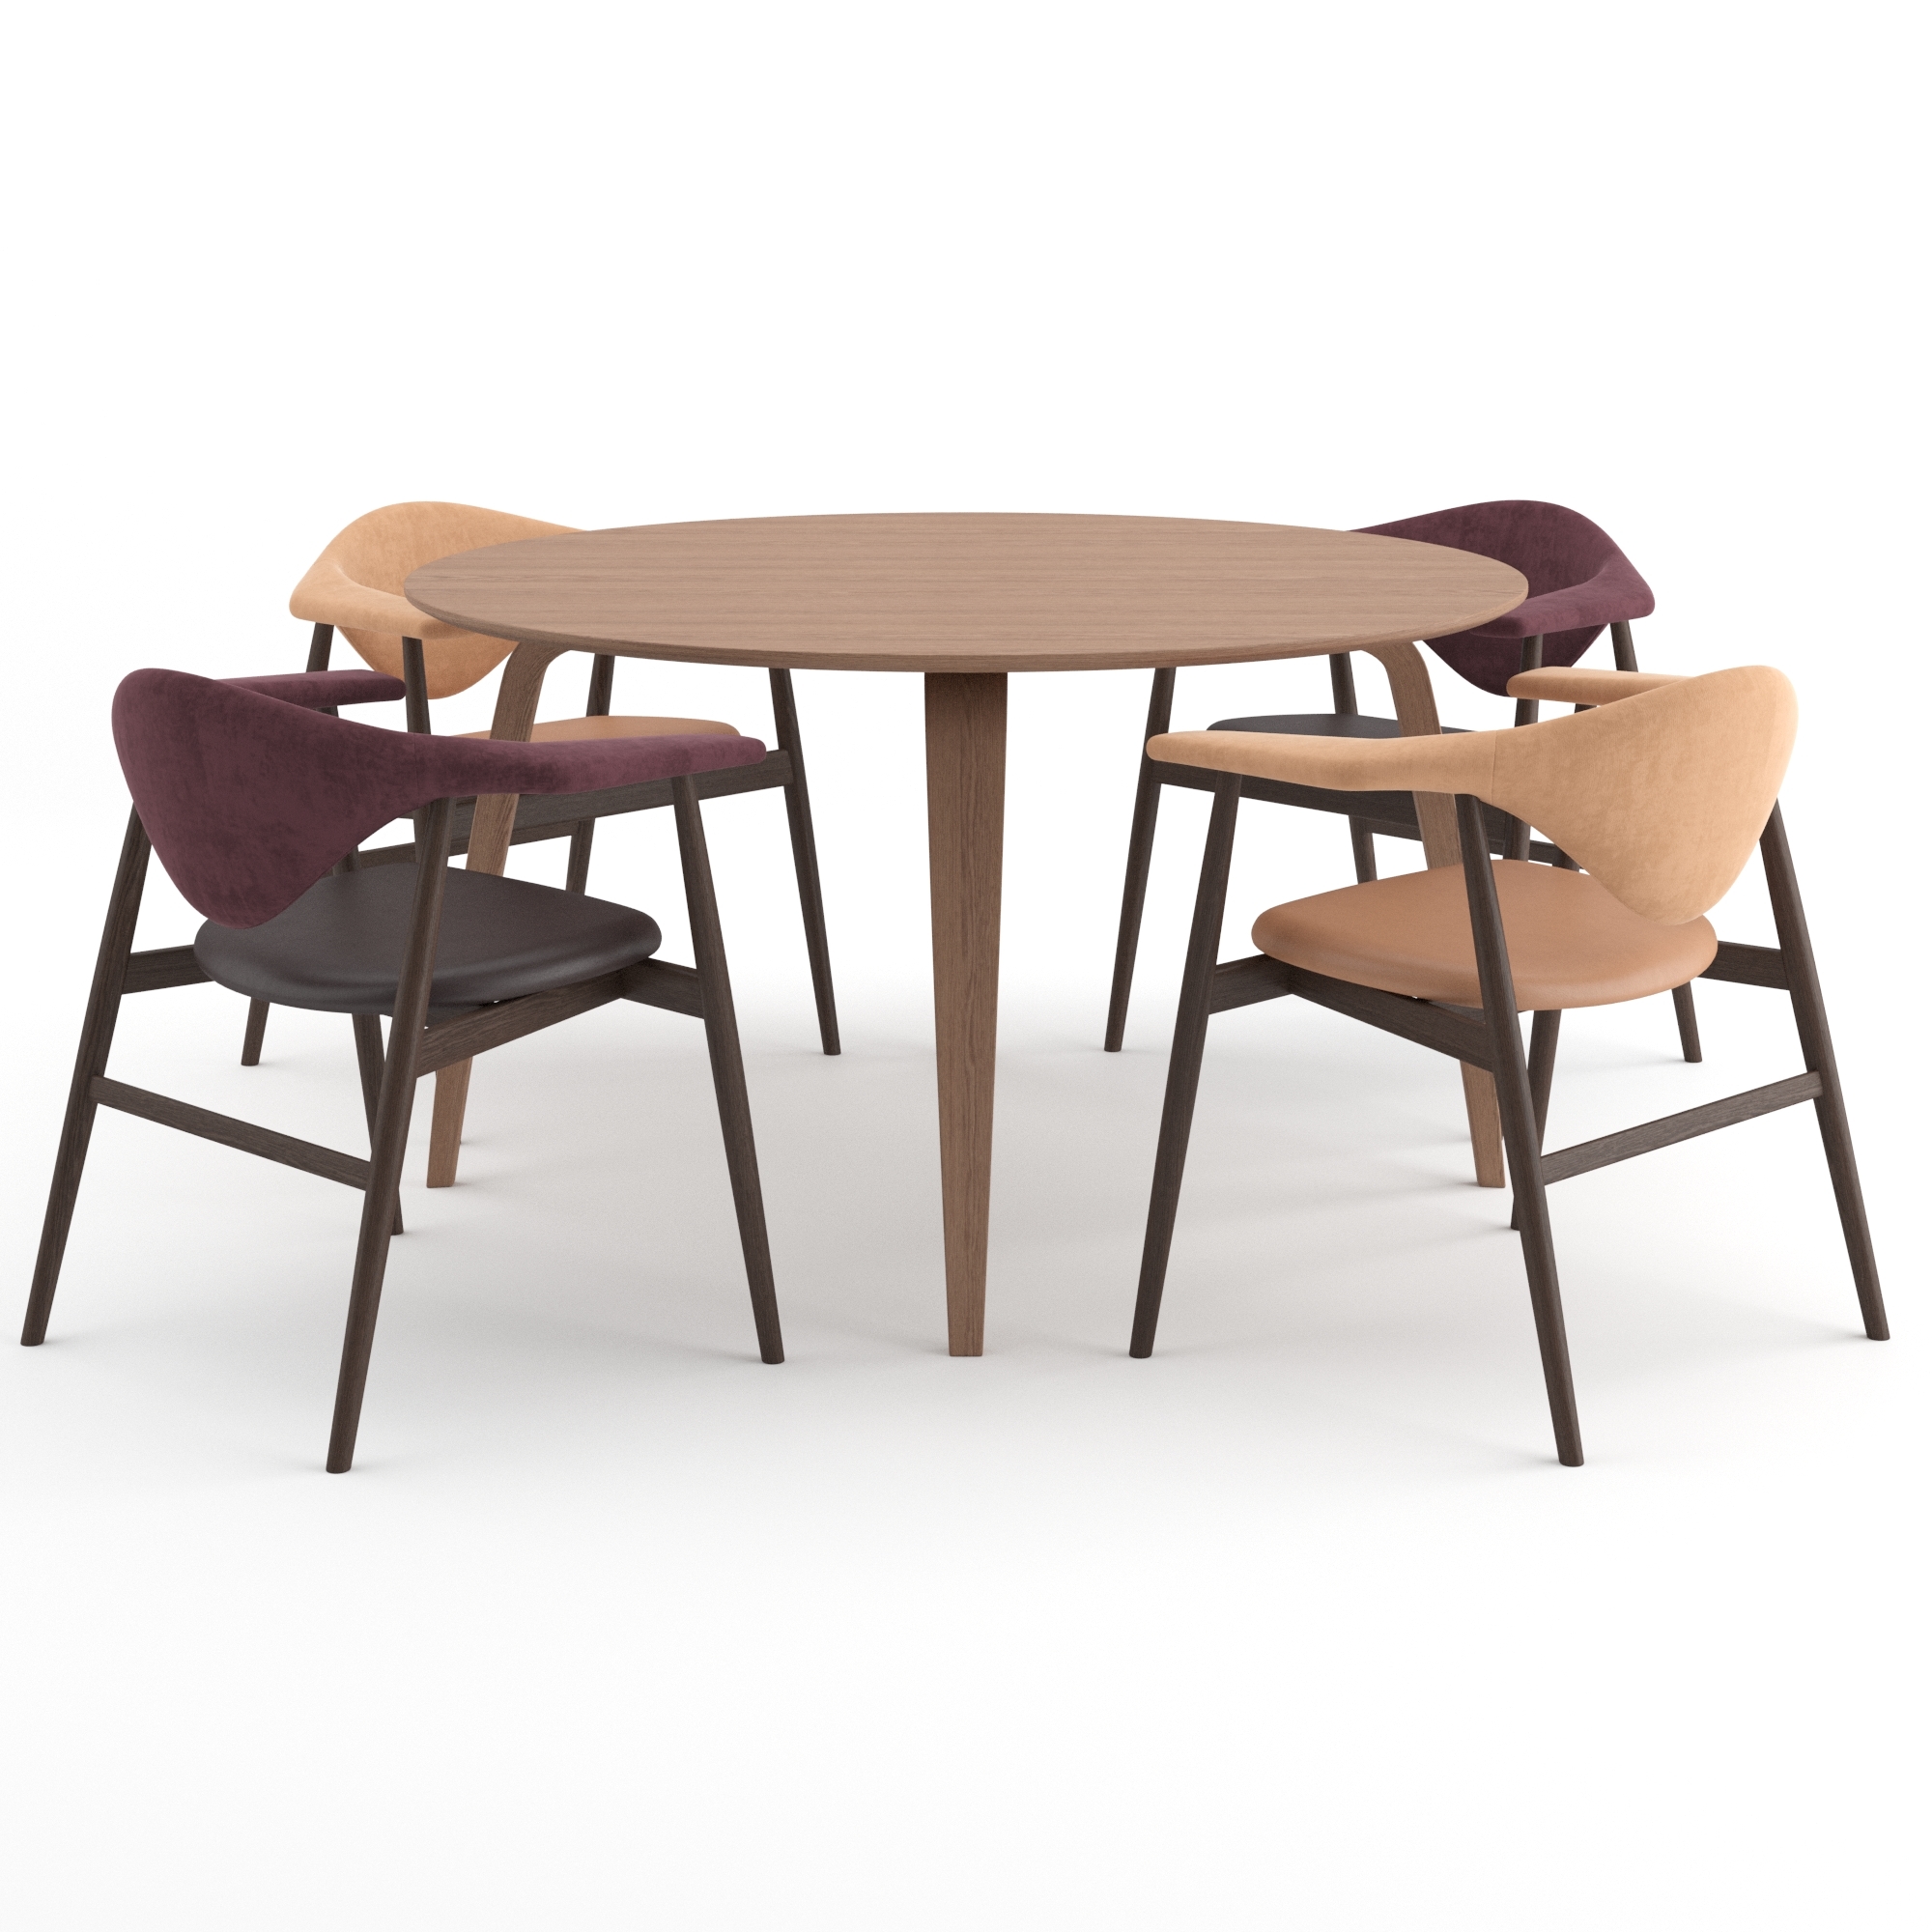 3D chairs tables masculo ts - TurboSquid 1440410